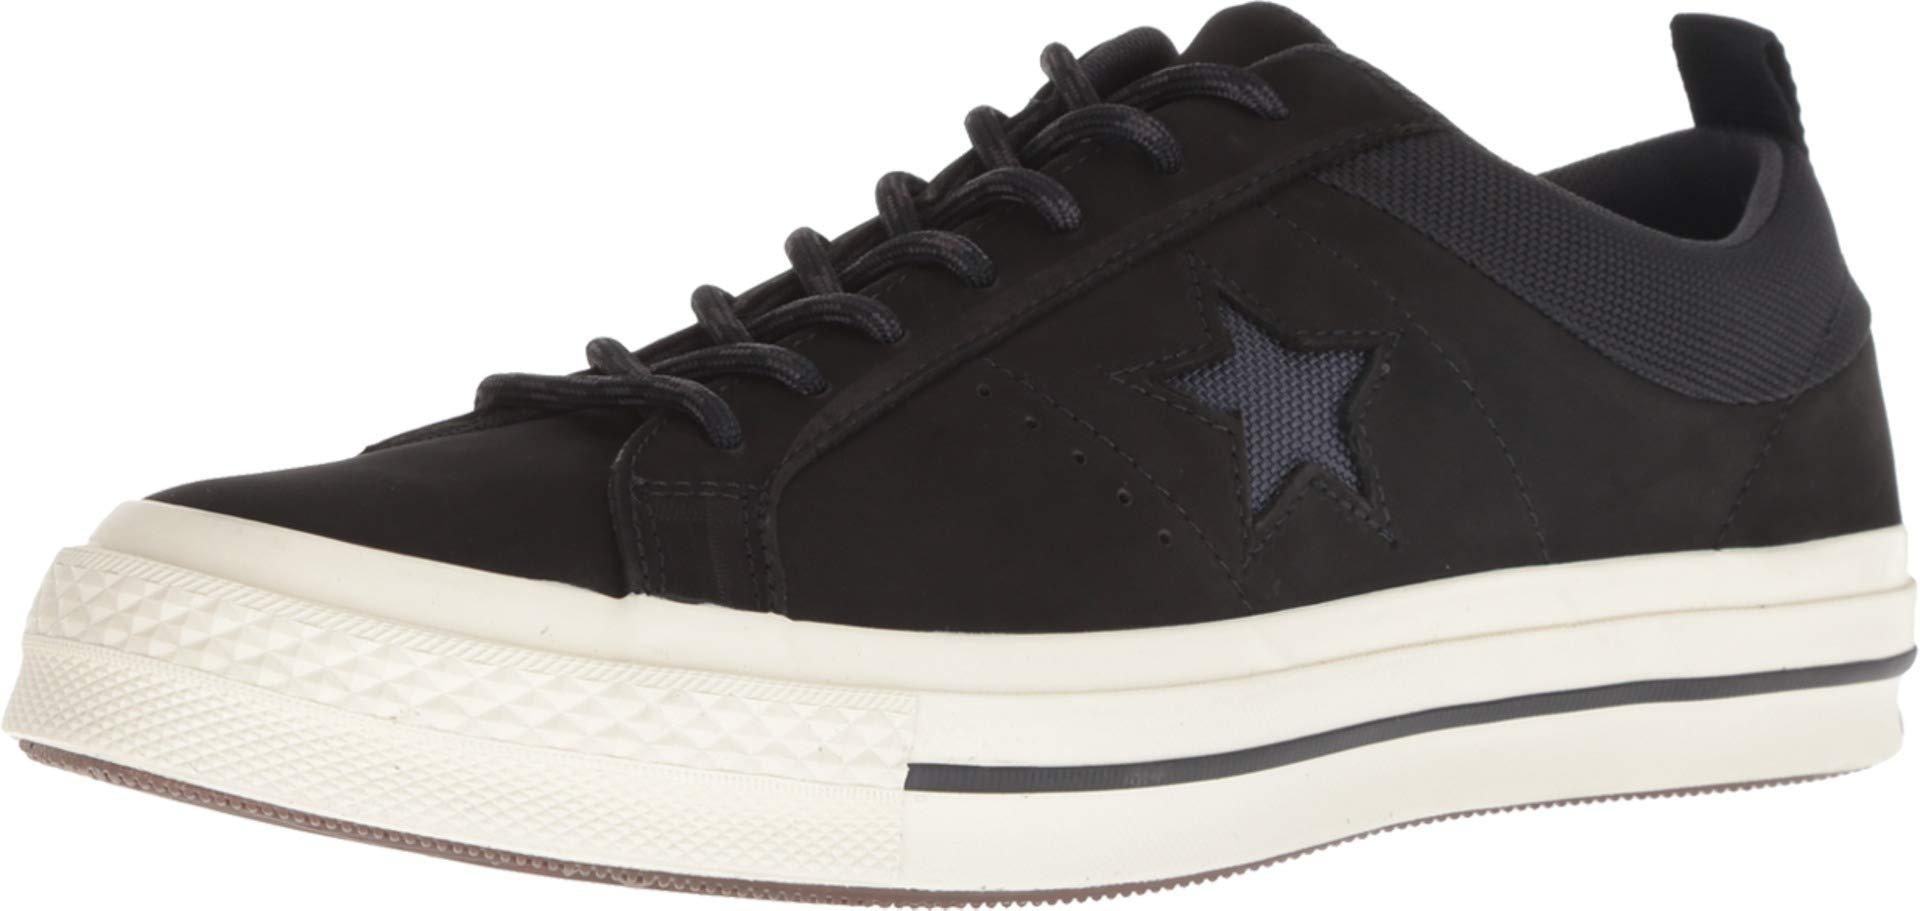 Converse Suede One Star - Ox in Black 